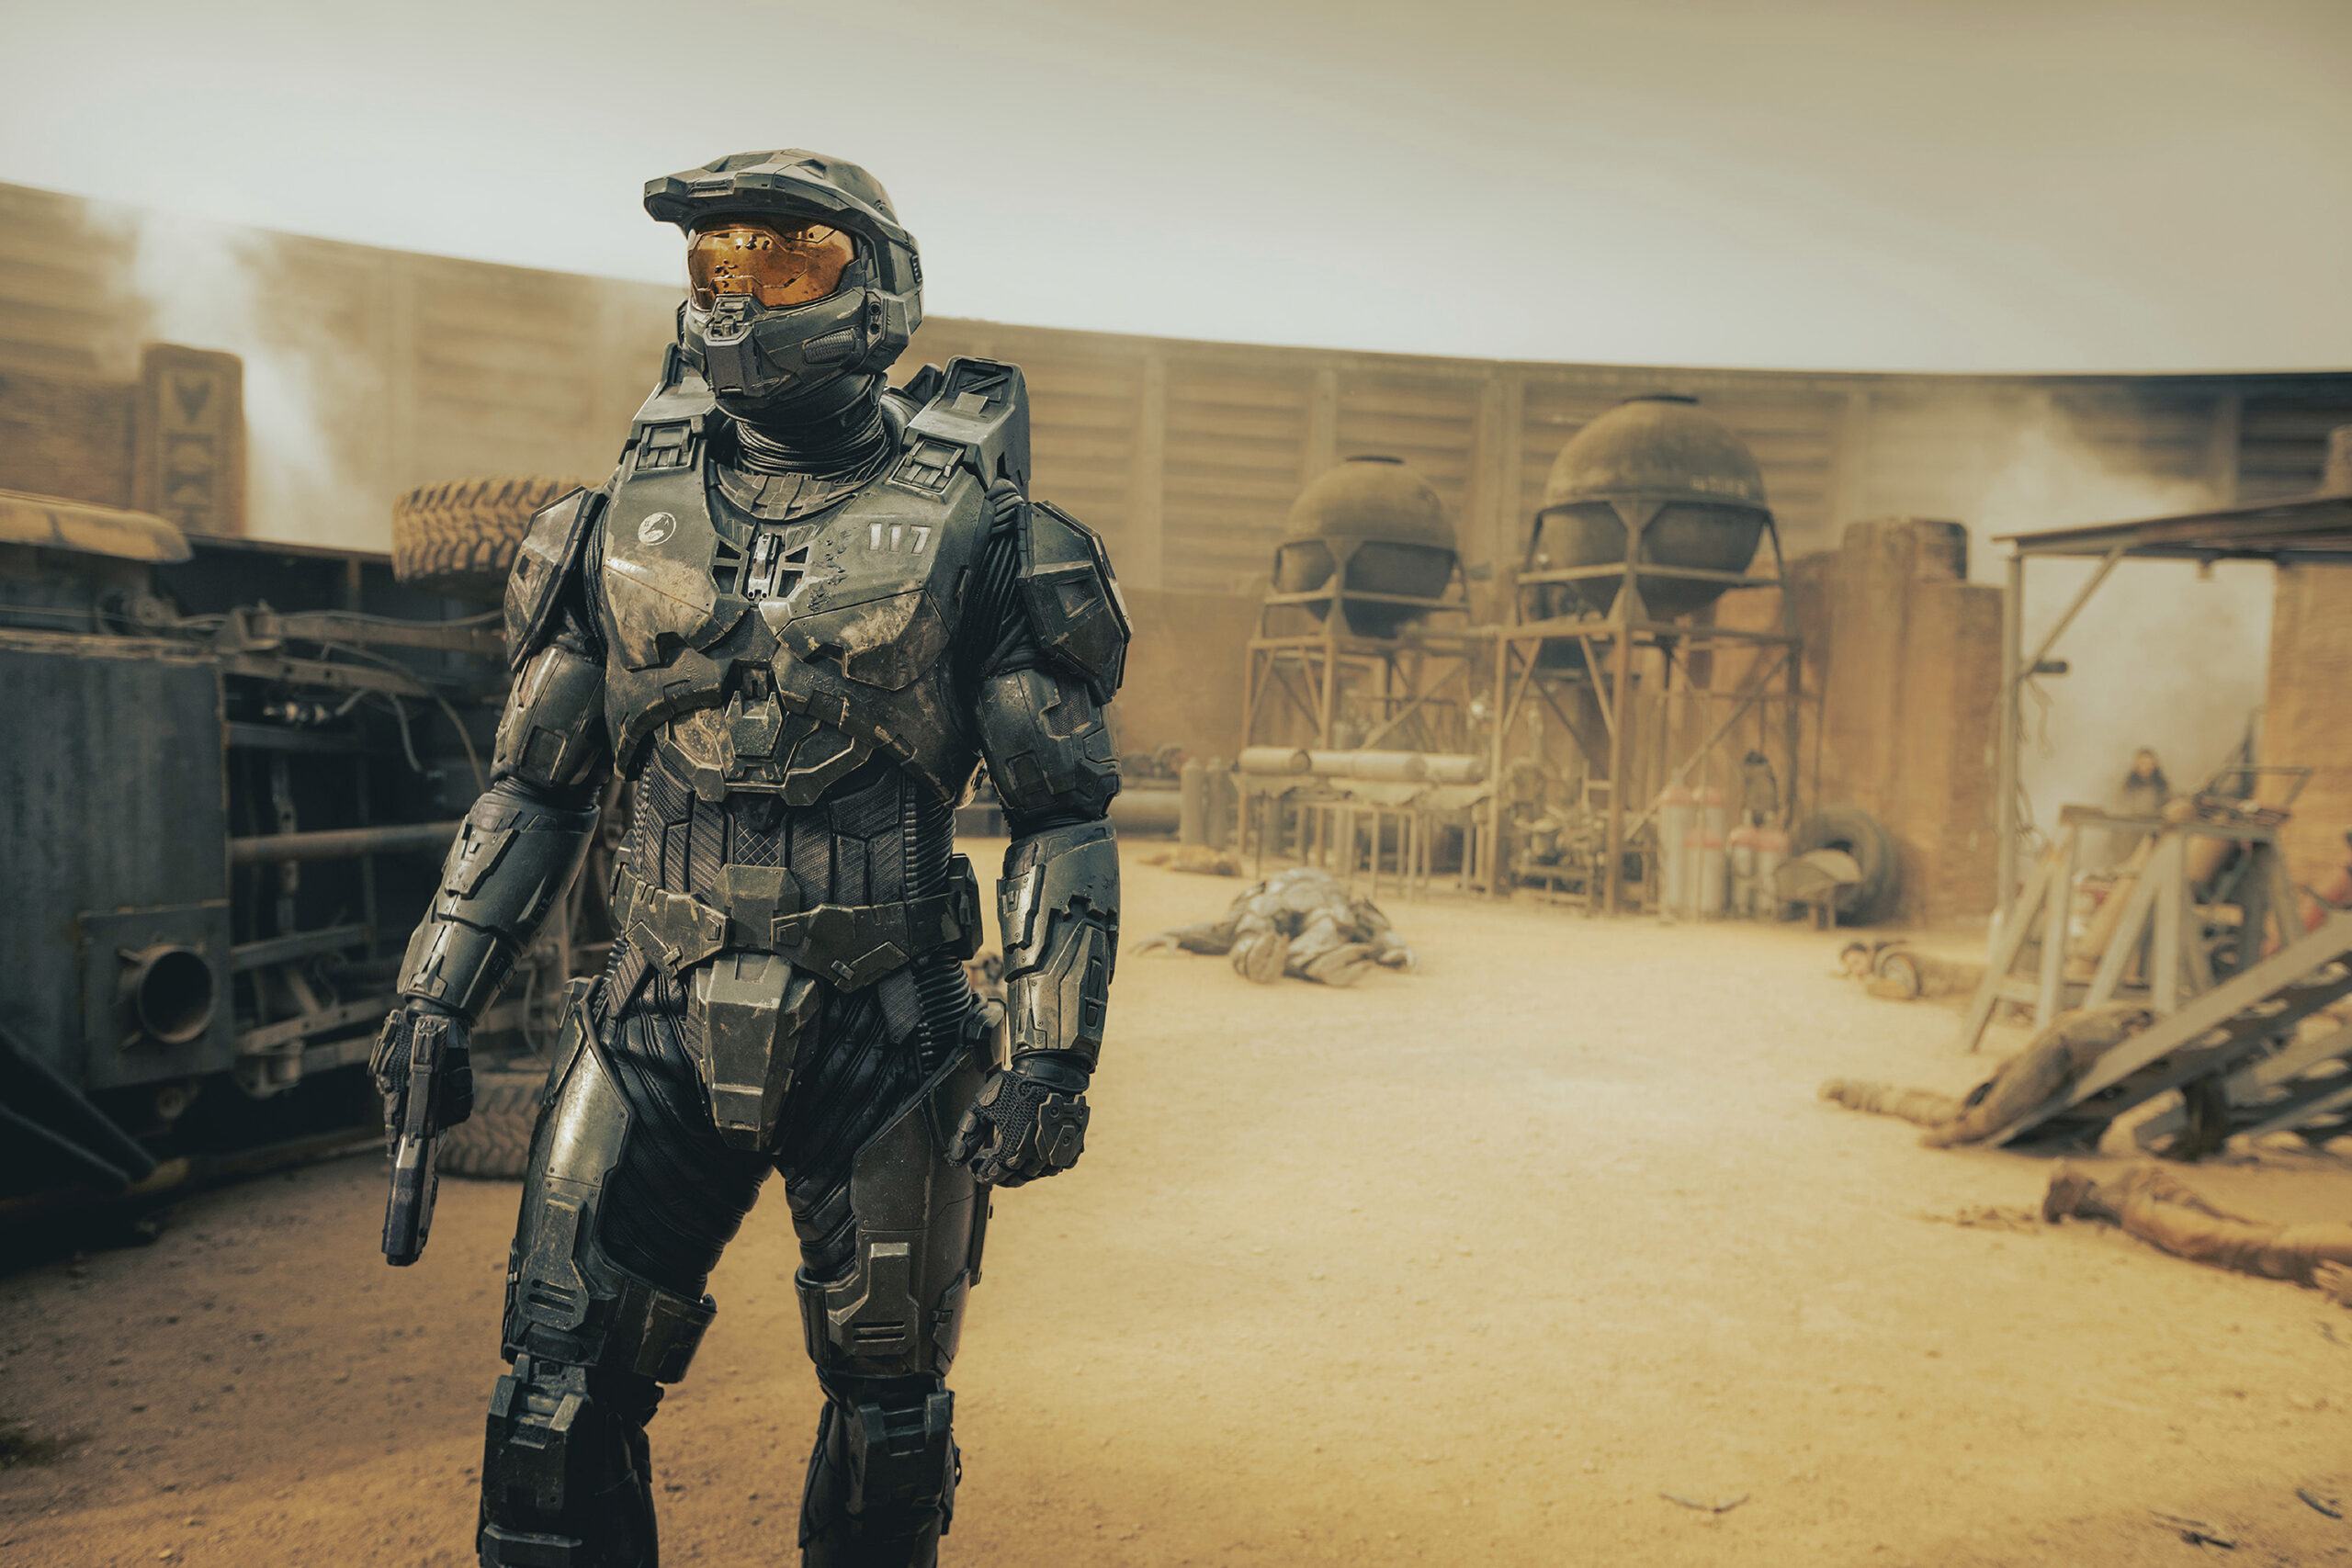 A still from Paramount+ series Halo